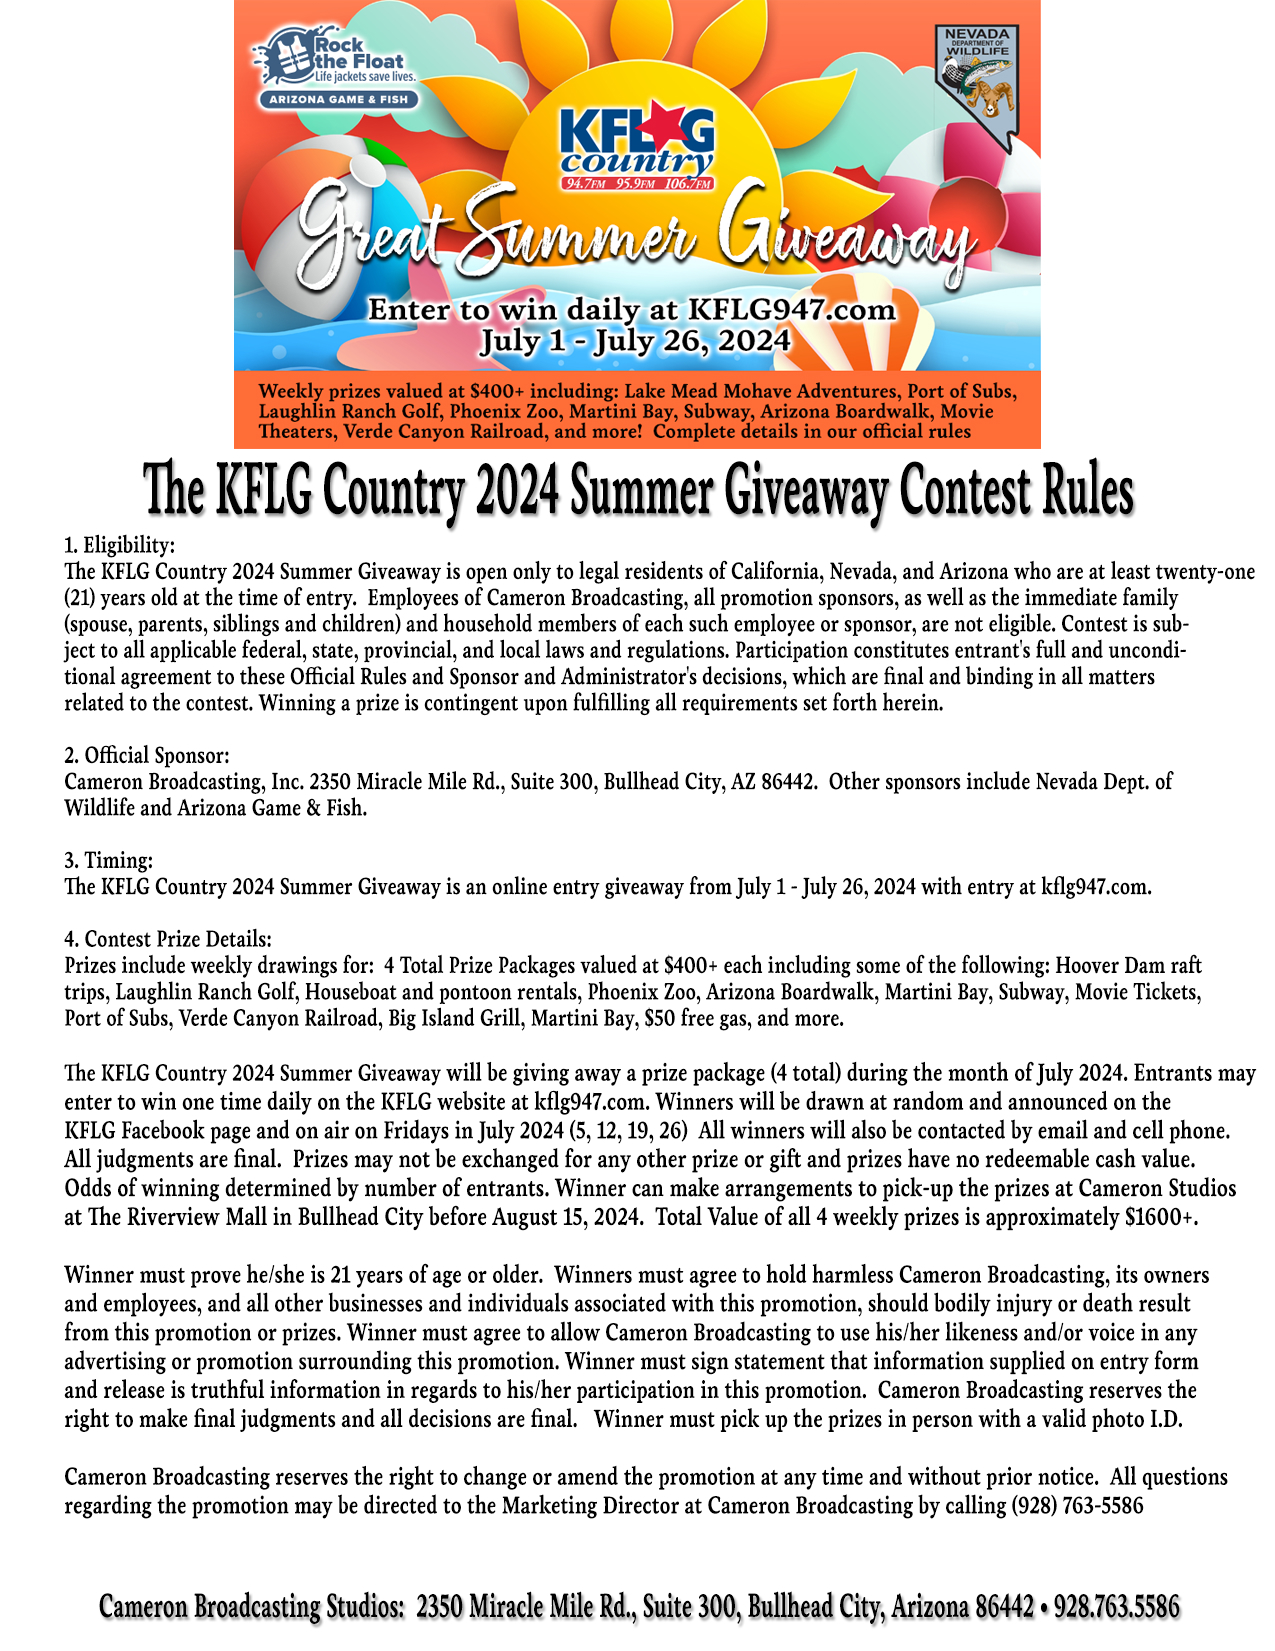 The KFLG Country 2024 Summer Giveaway Contest Rules